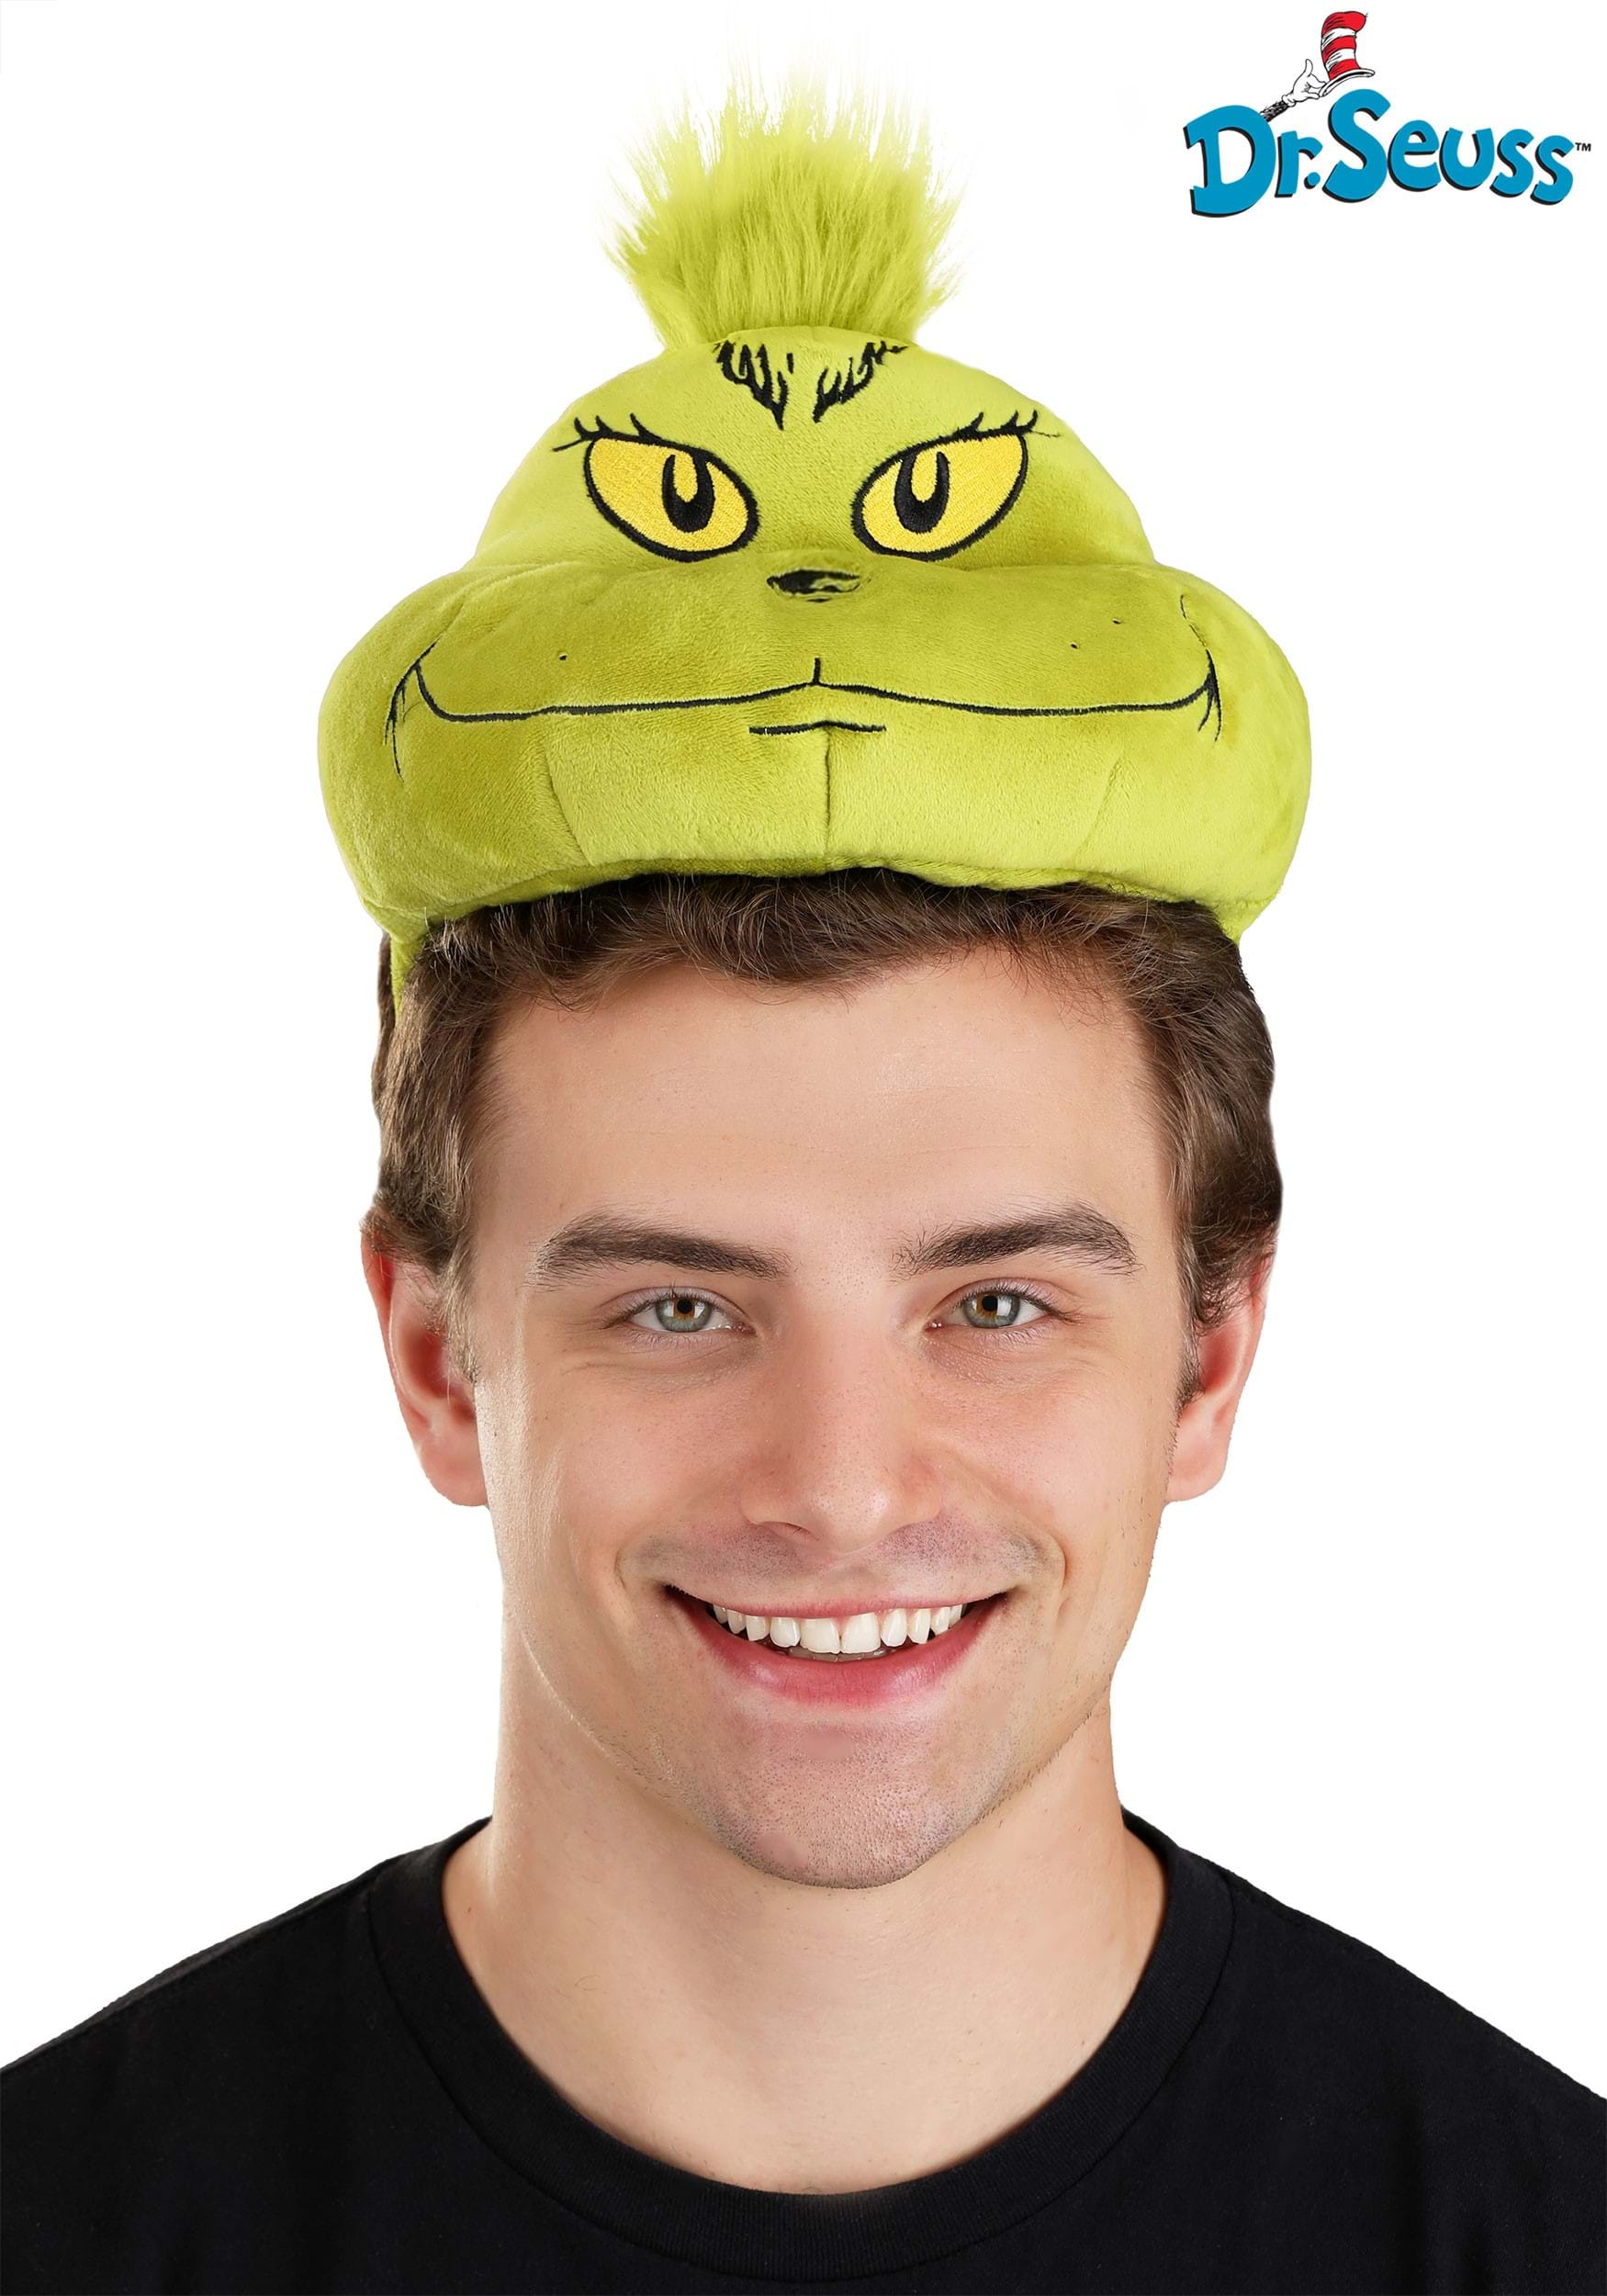 https://images.halloween.com/products/80774/1-1/the-grinch-face-headband.jpg